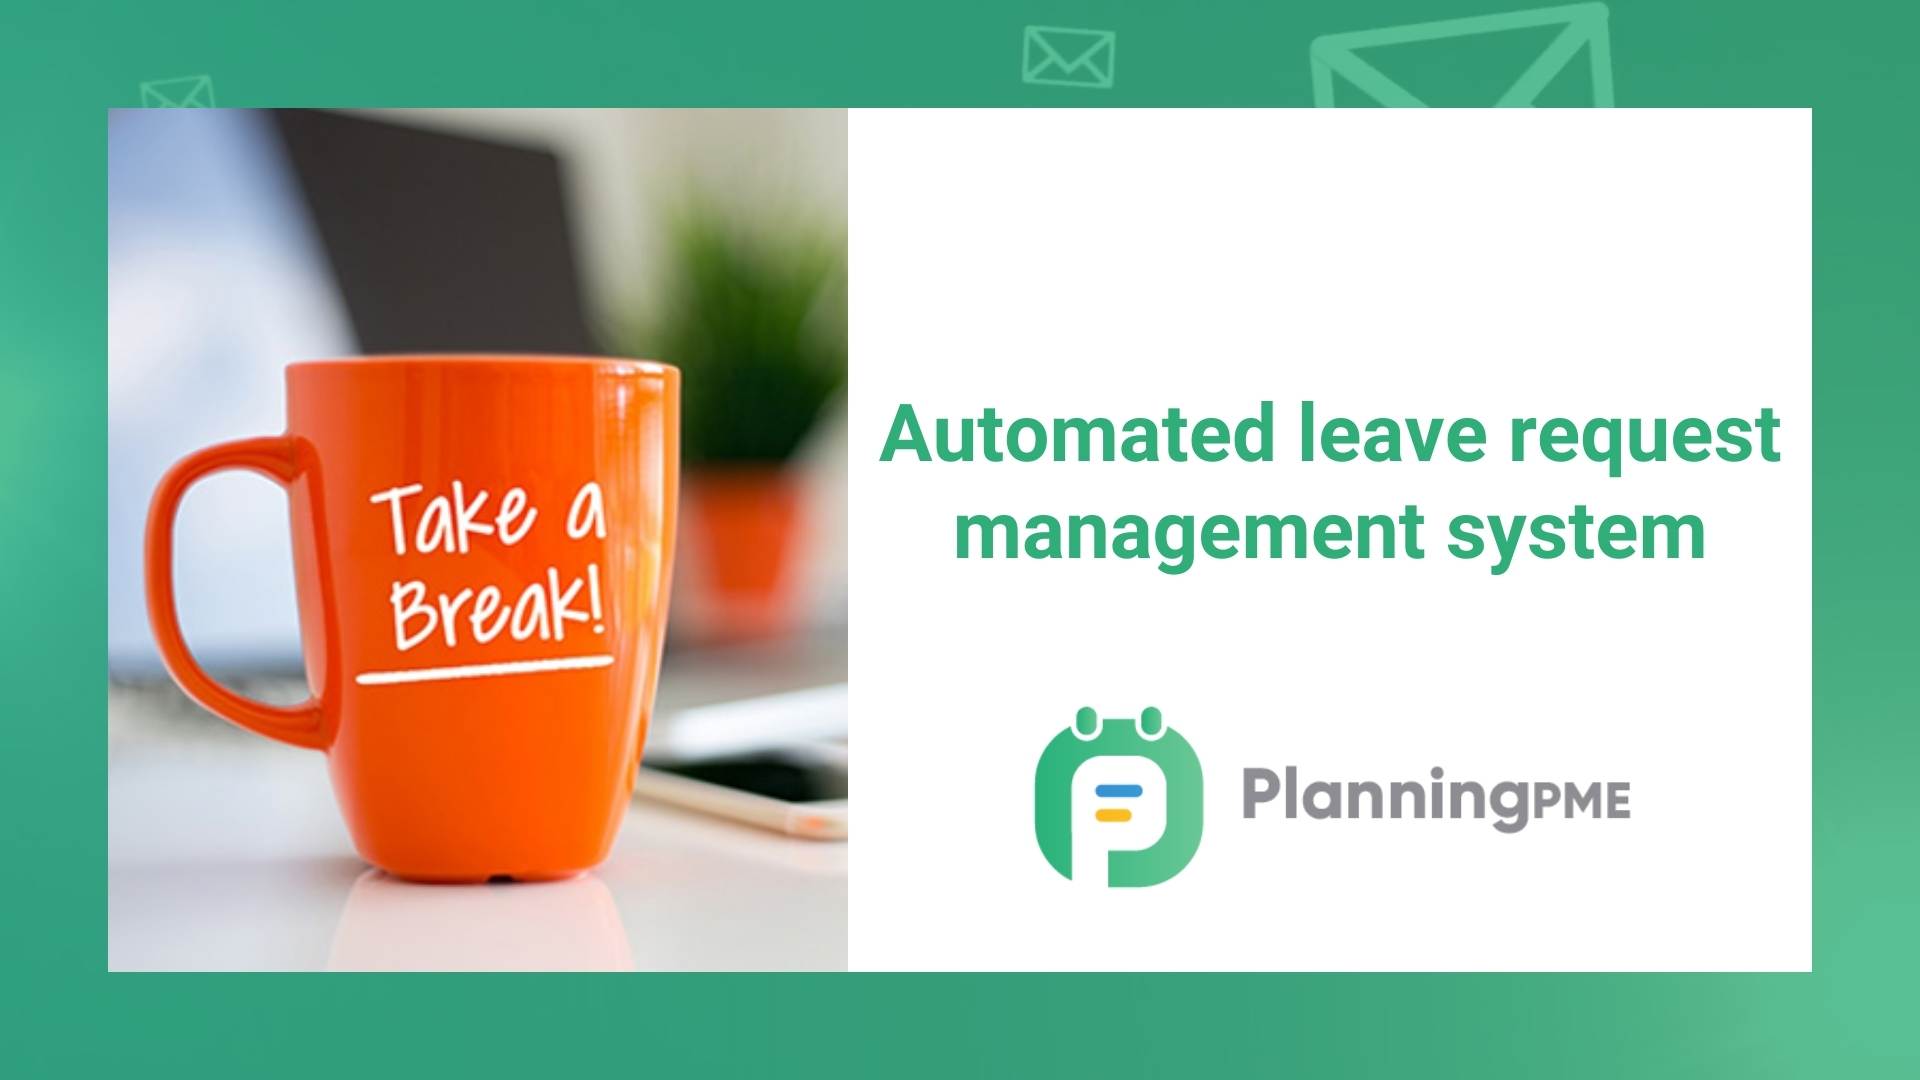 Automated management of leave requests